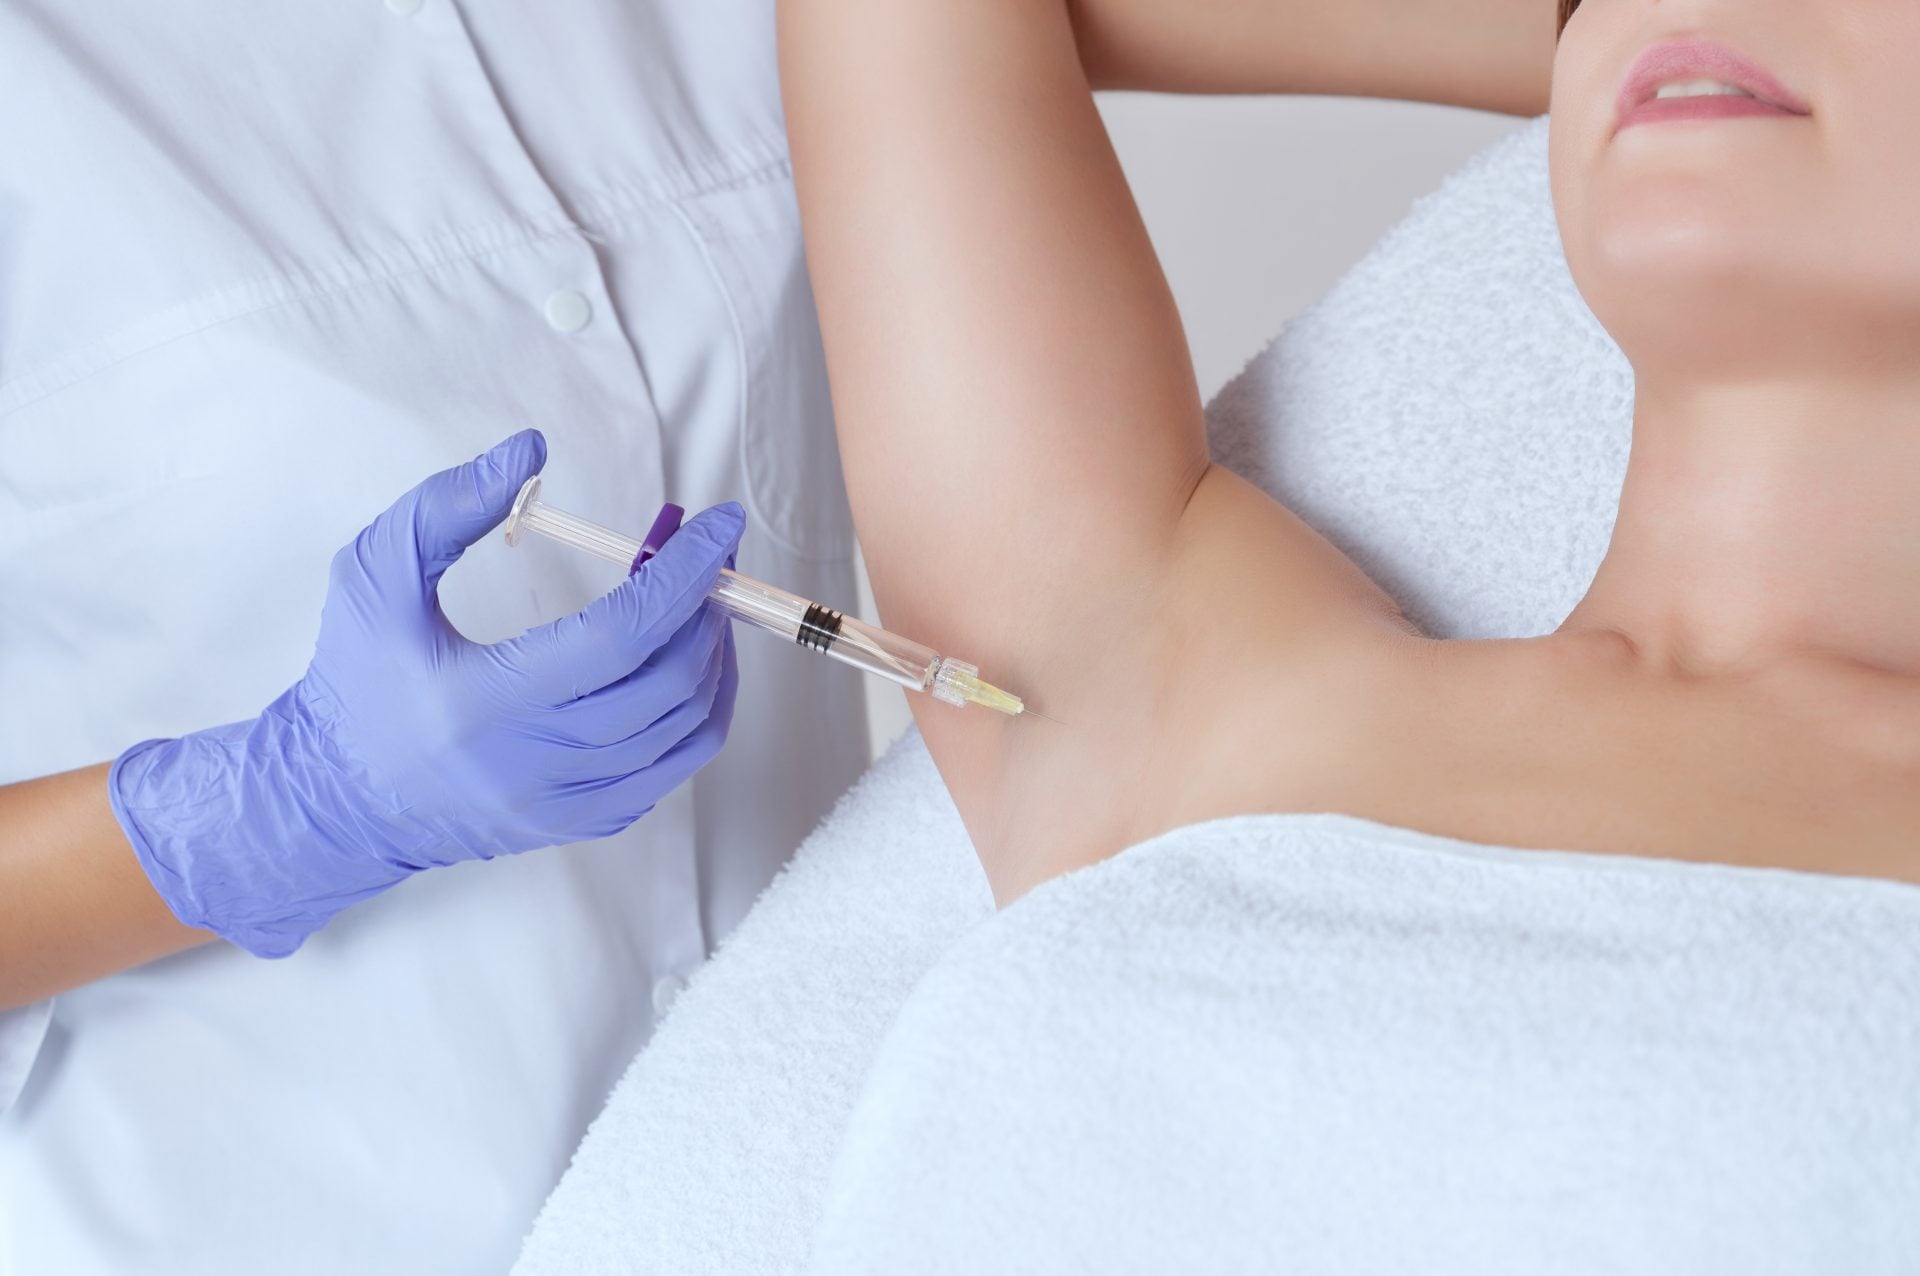 Is Botox effective for excessive sweating